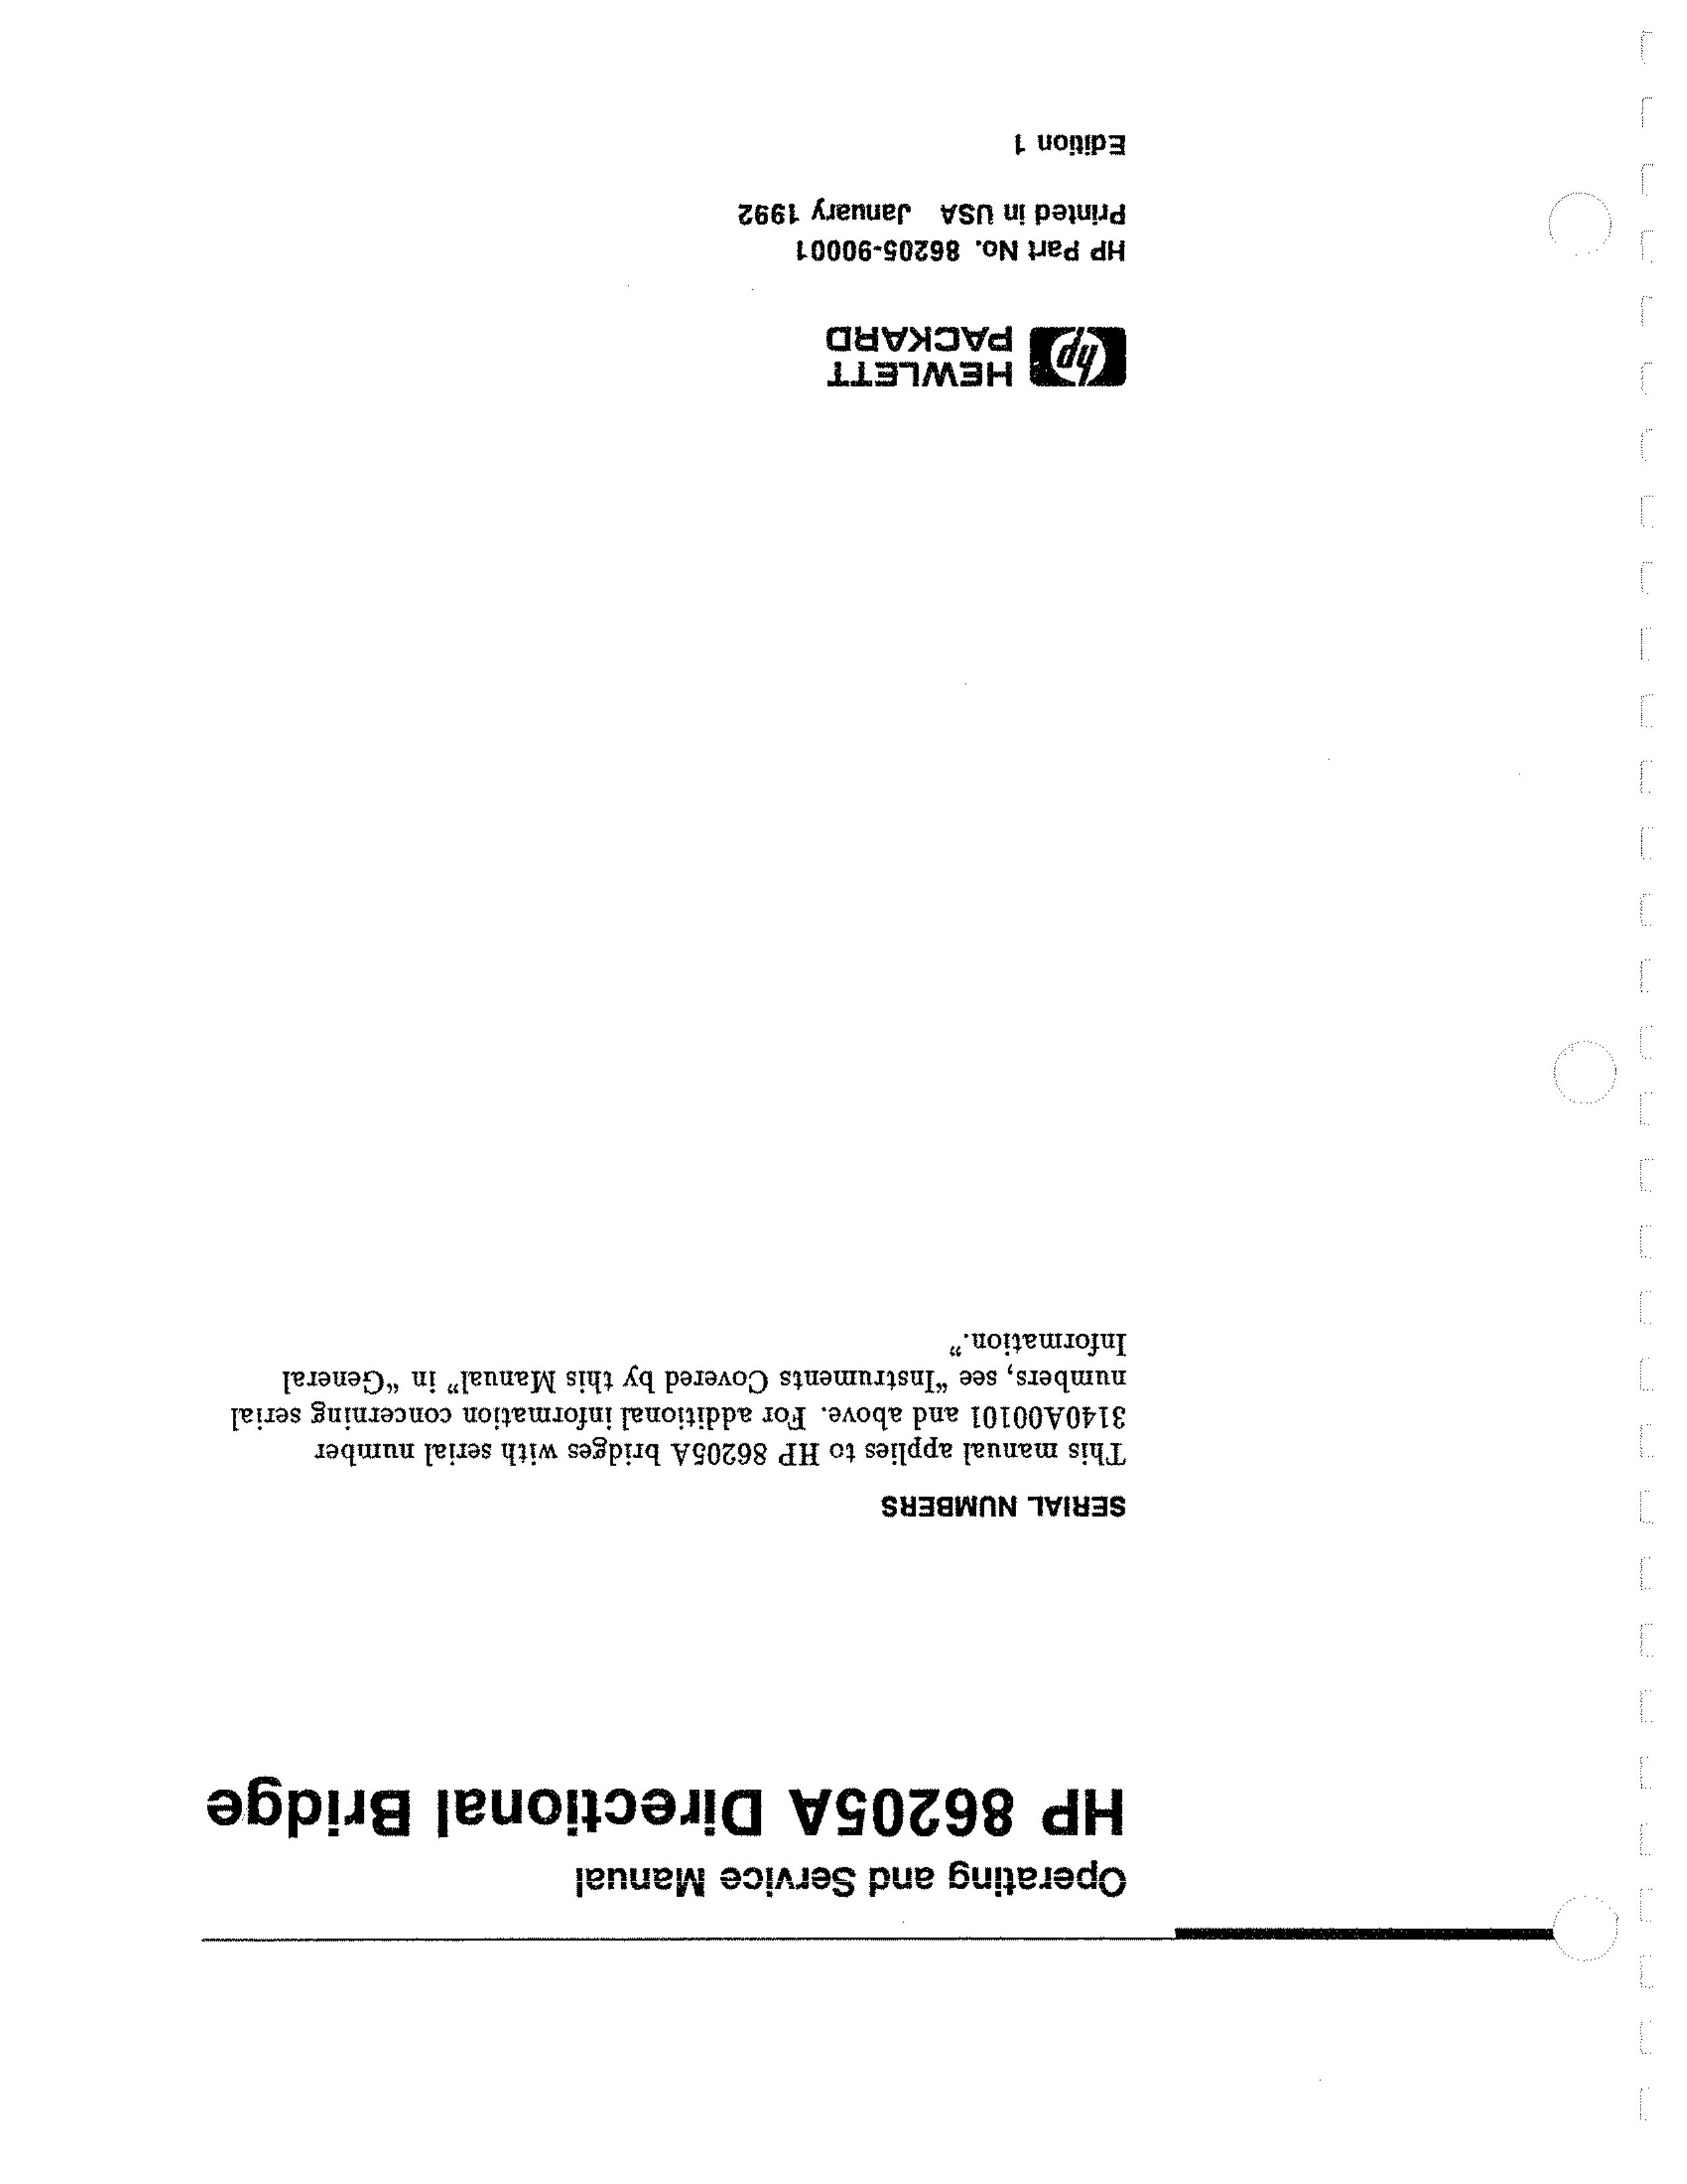 HP (Hewlett-Packard) 86205-90001 Light Therapy Device User Manual